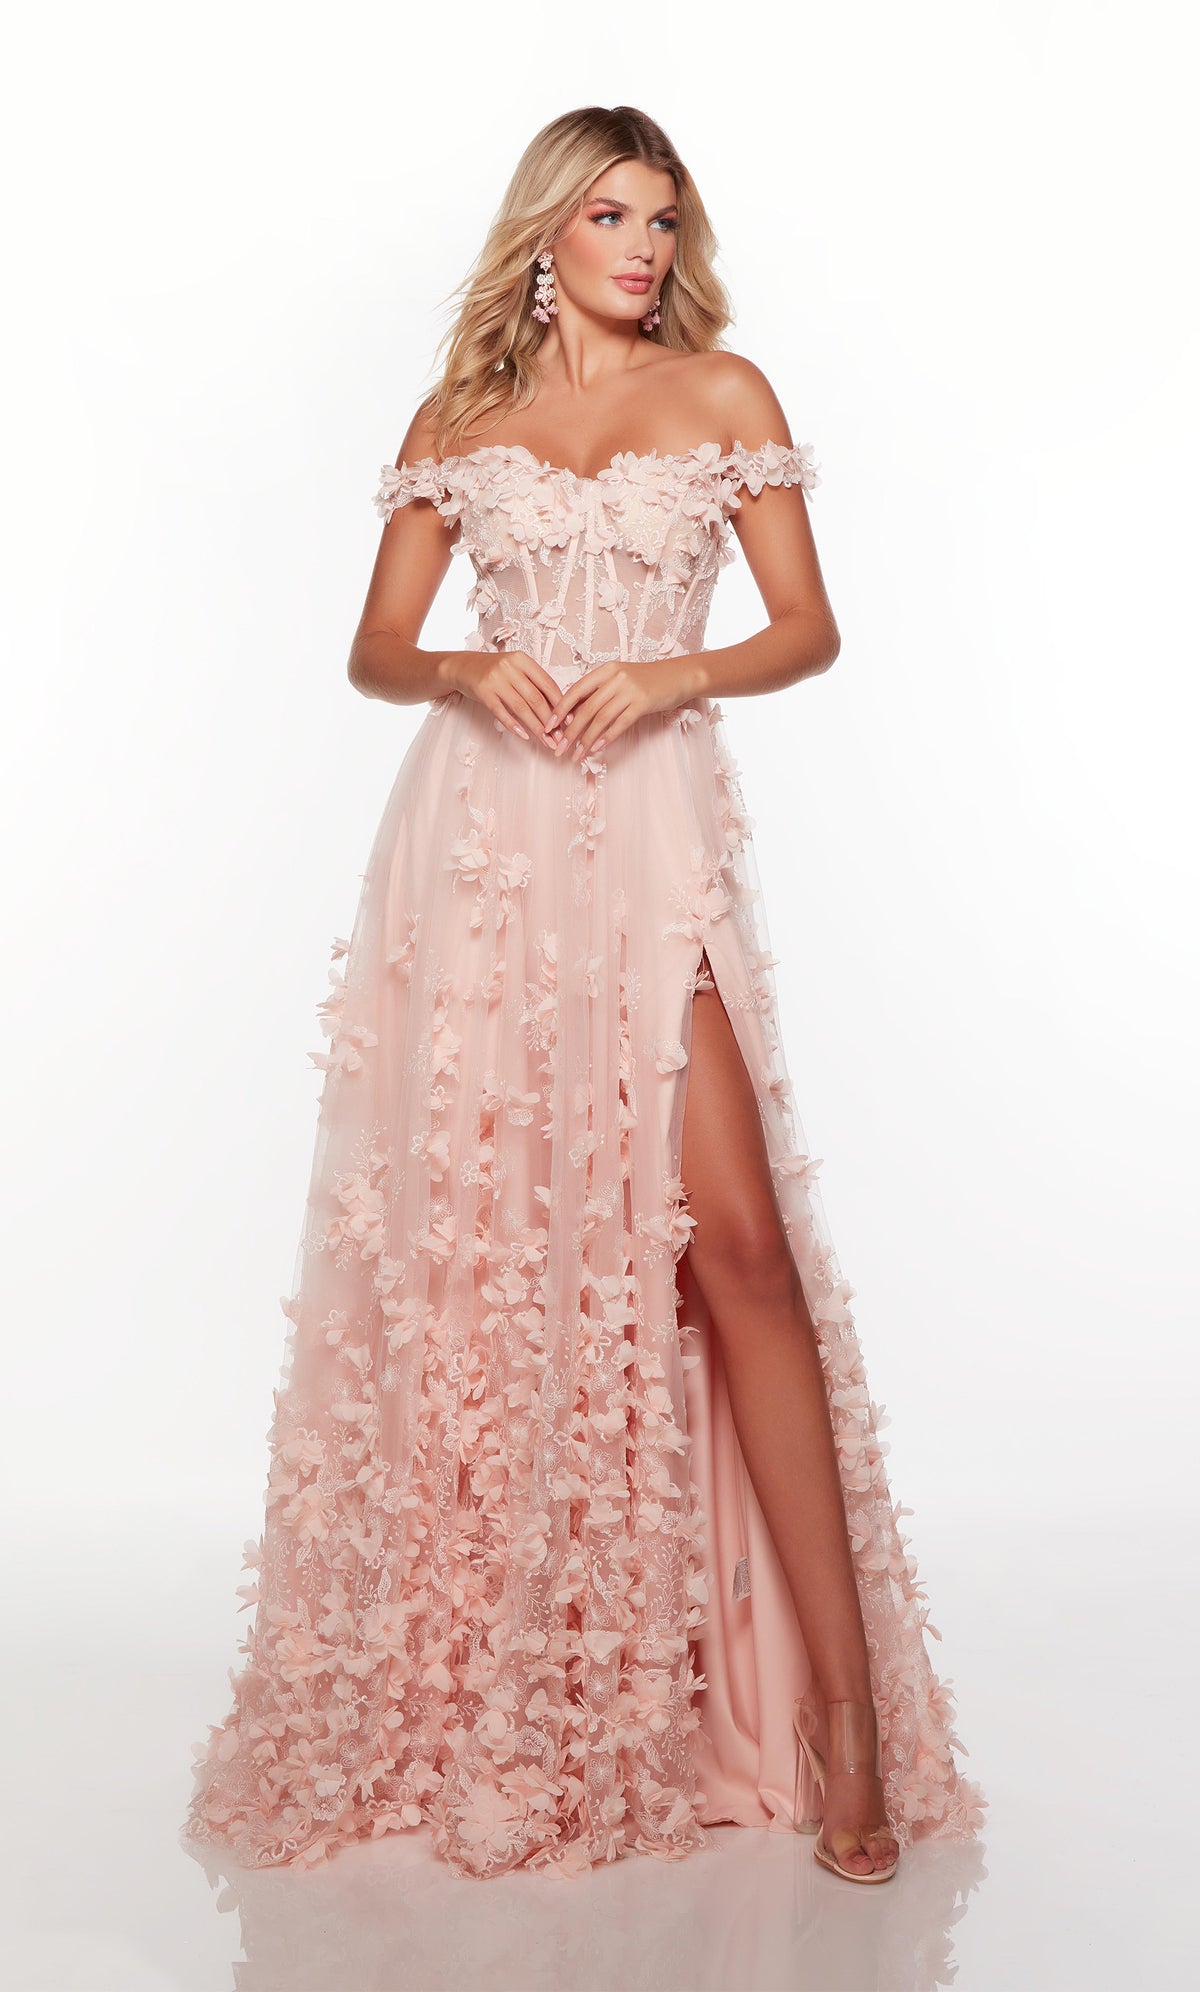 Light pink off the shoulder corset prom dress with a sheer bodice, high side slit, and delicate 3d flowers throughout. COLOR-SWATCH_61308__ROSEWATER